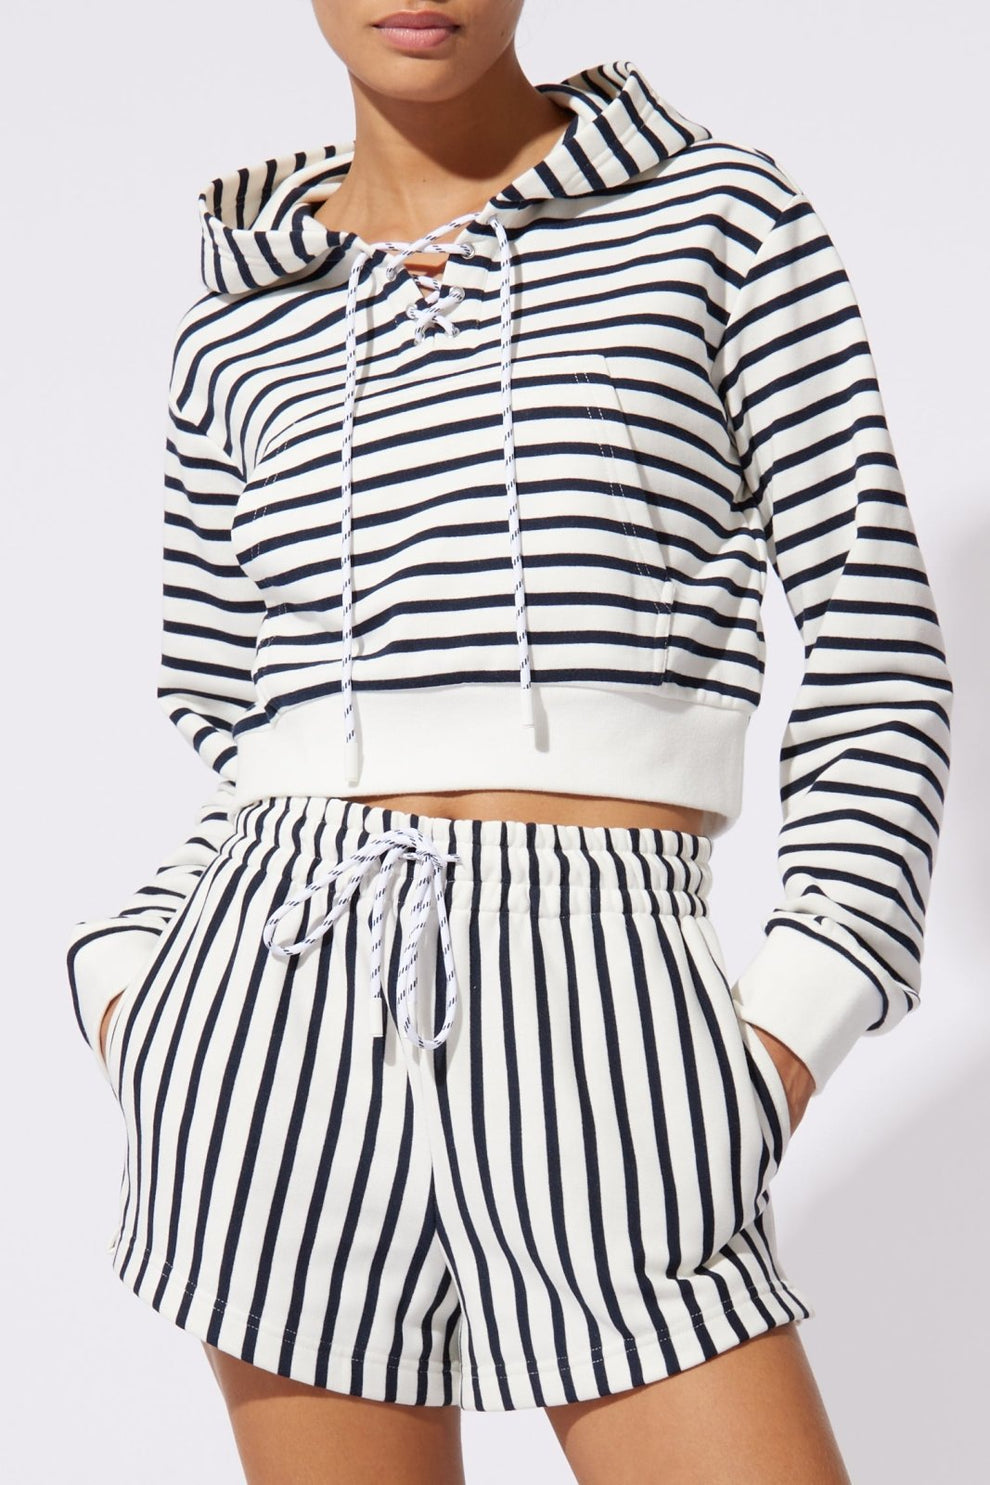 Solid & Striped - The Jolie Hoodie - Varsity Blue and Marshmallow